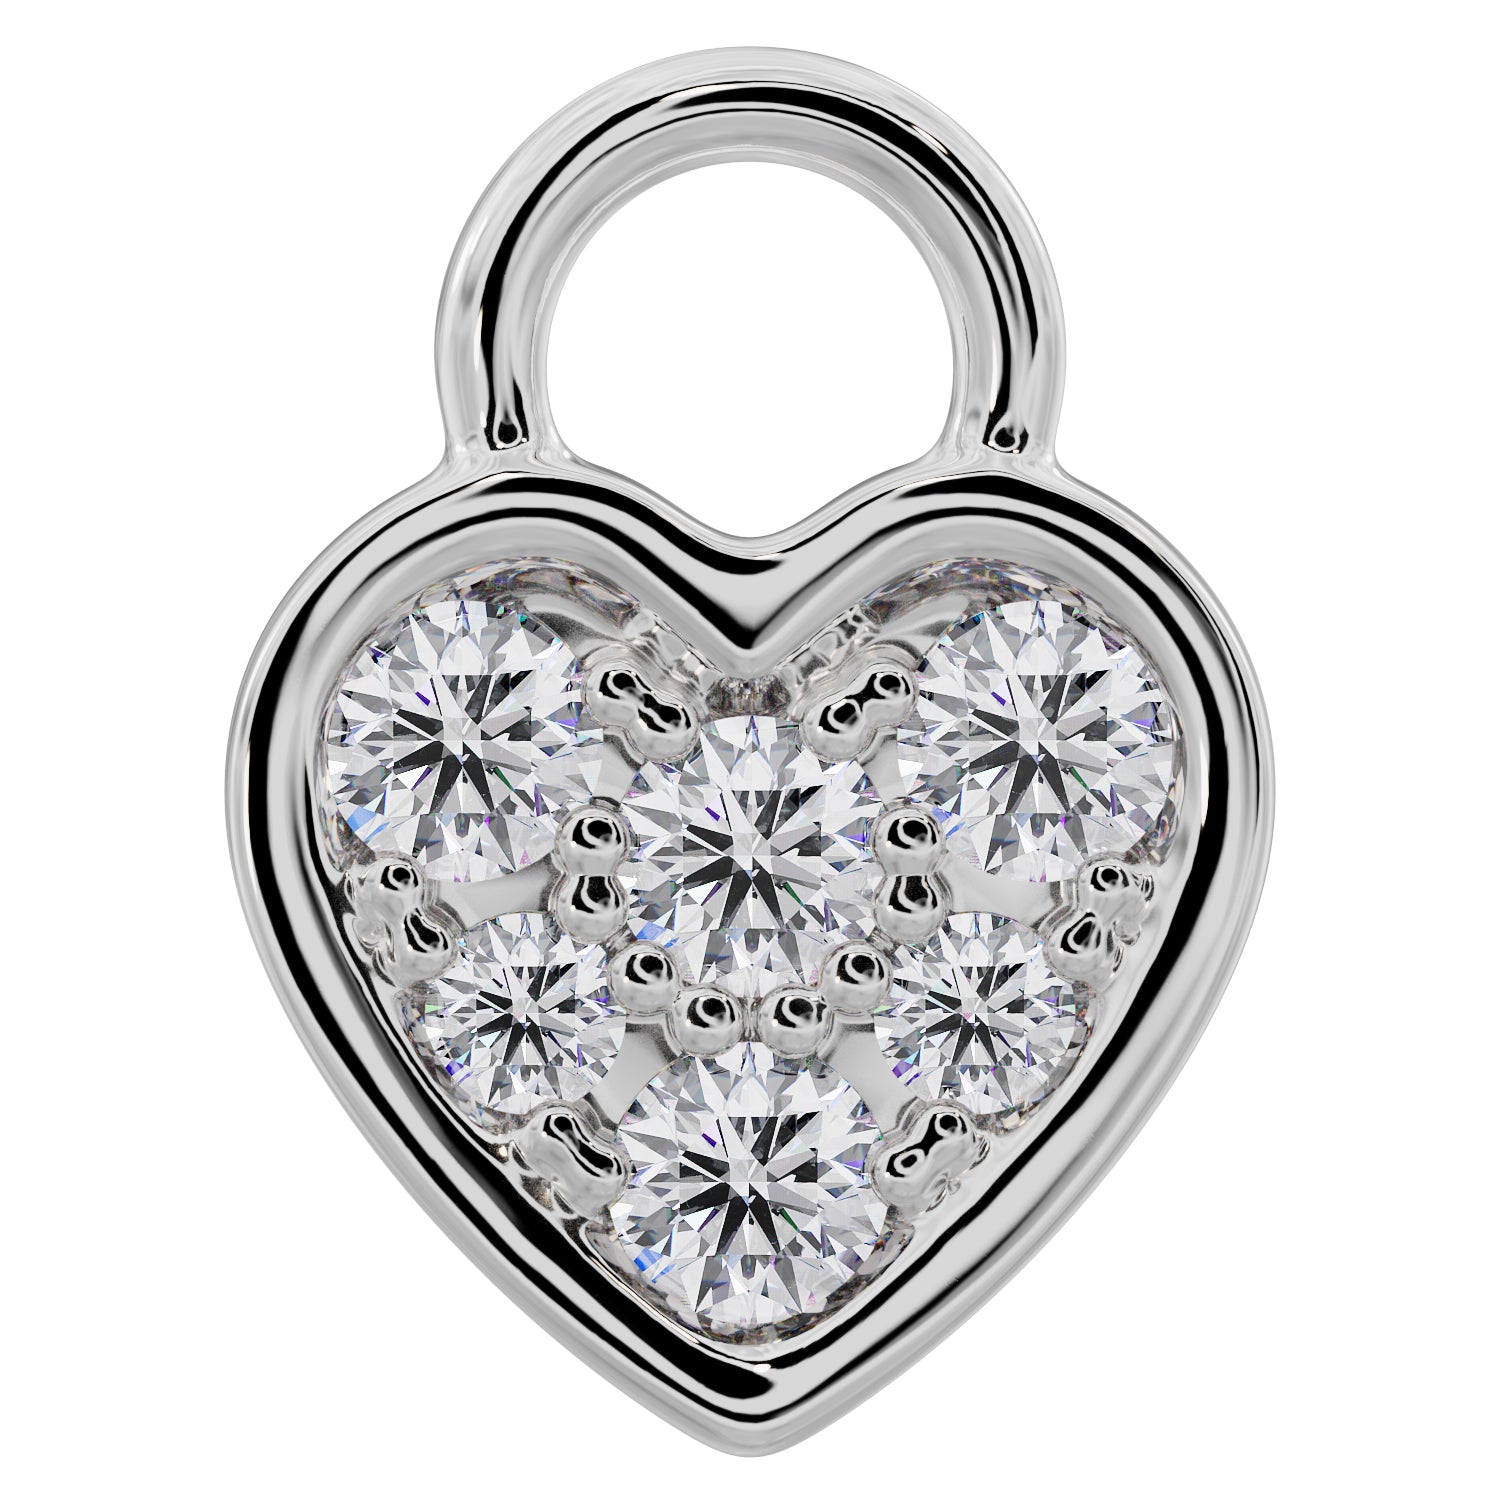 Heart Diamond Pave Charm Accessory for Piercing Jewelry-14K White Gold